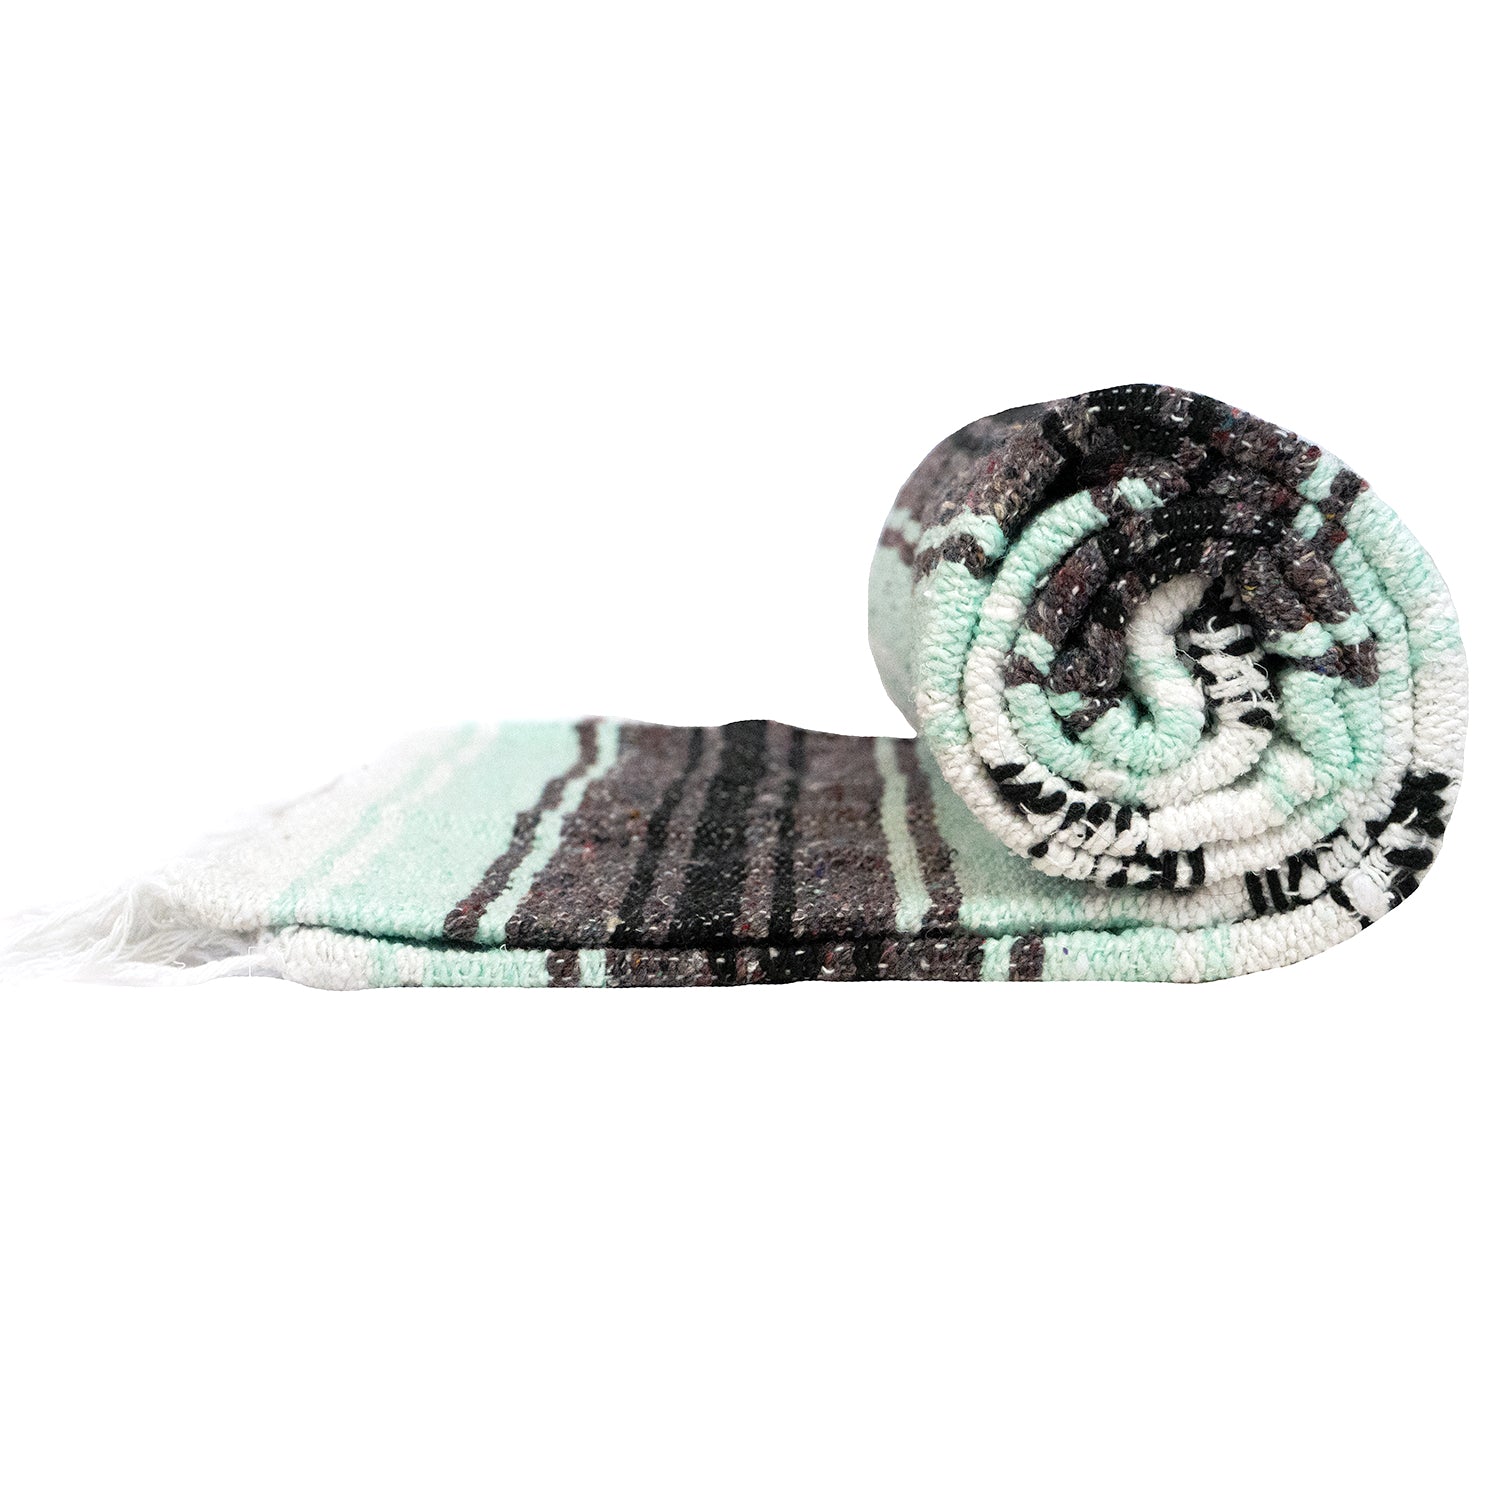 TEAL TRADITIONAL MEXICAN YOGA BLANKET – MexiMart